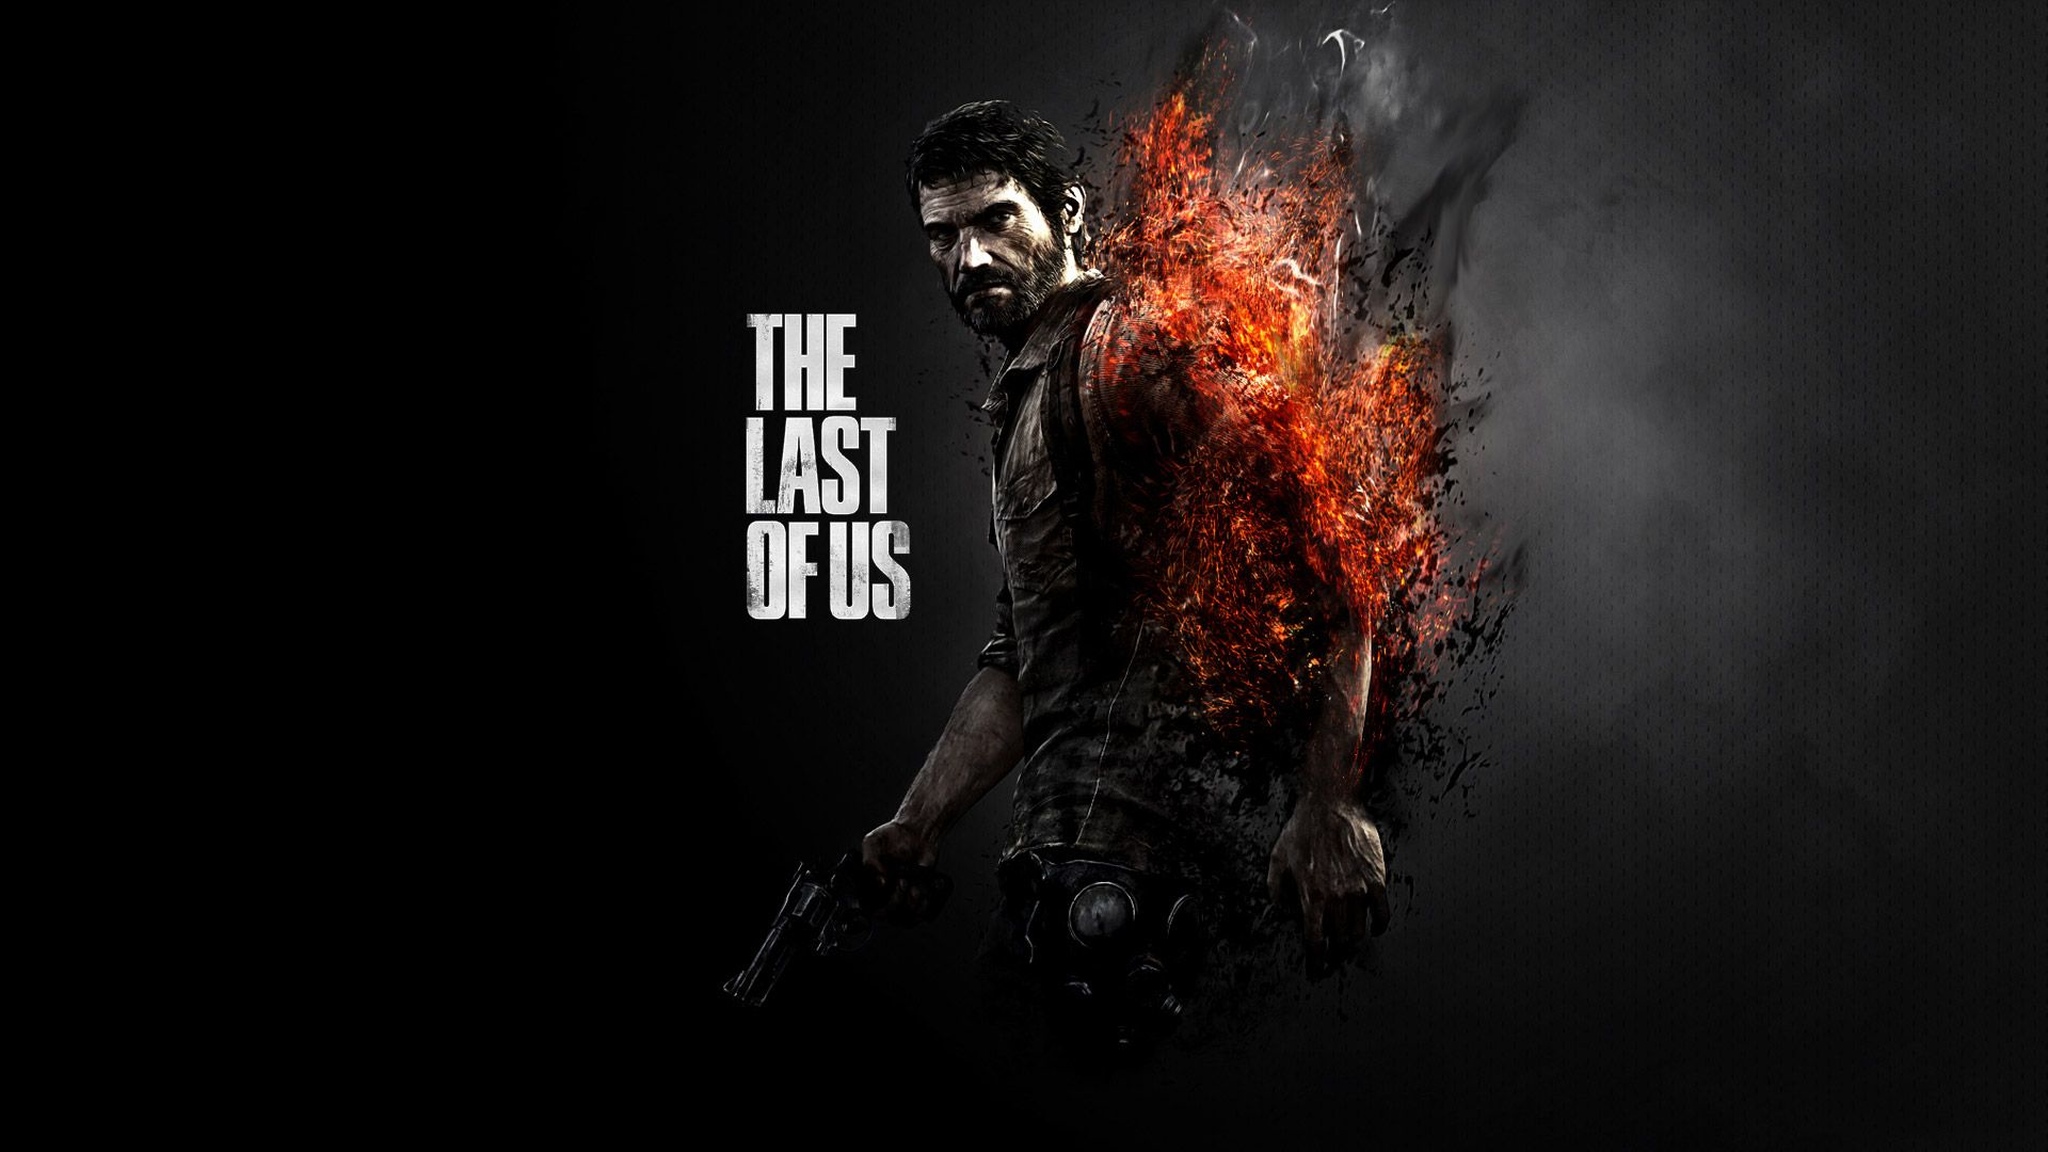 Ласт оф гейм. The last of us. The last of us игра. Джоэл the last of us. Обои the last of us 1920x1080 Джоэл.